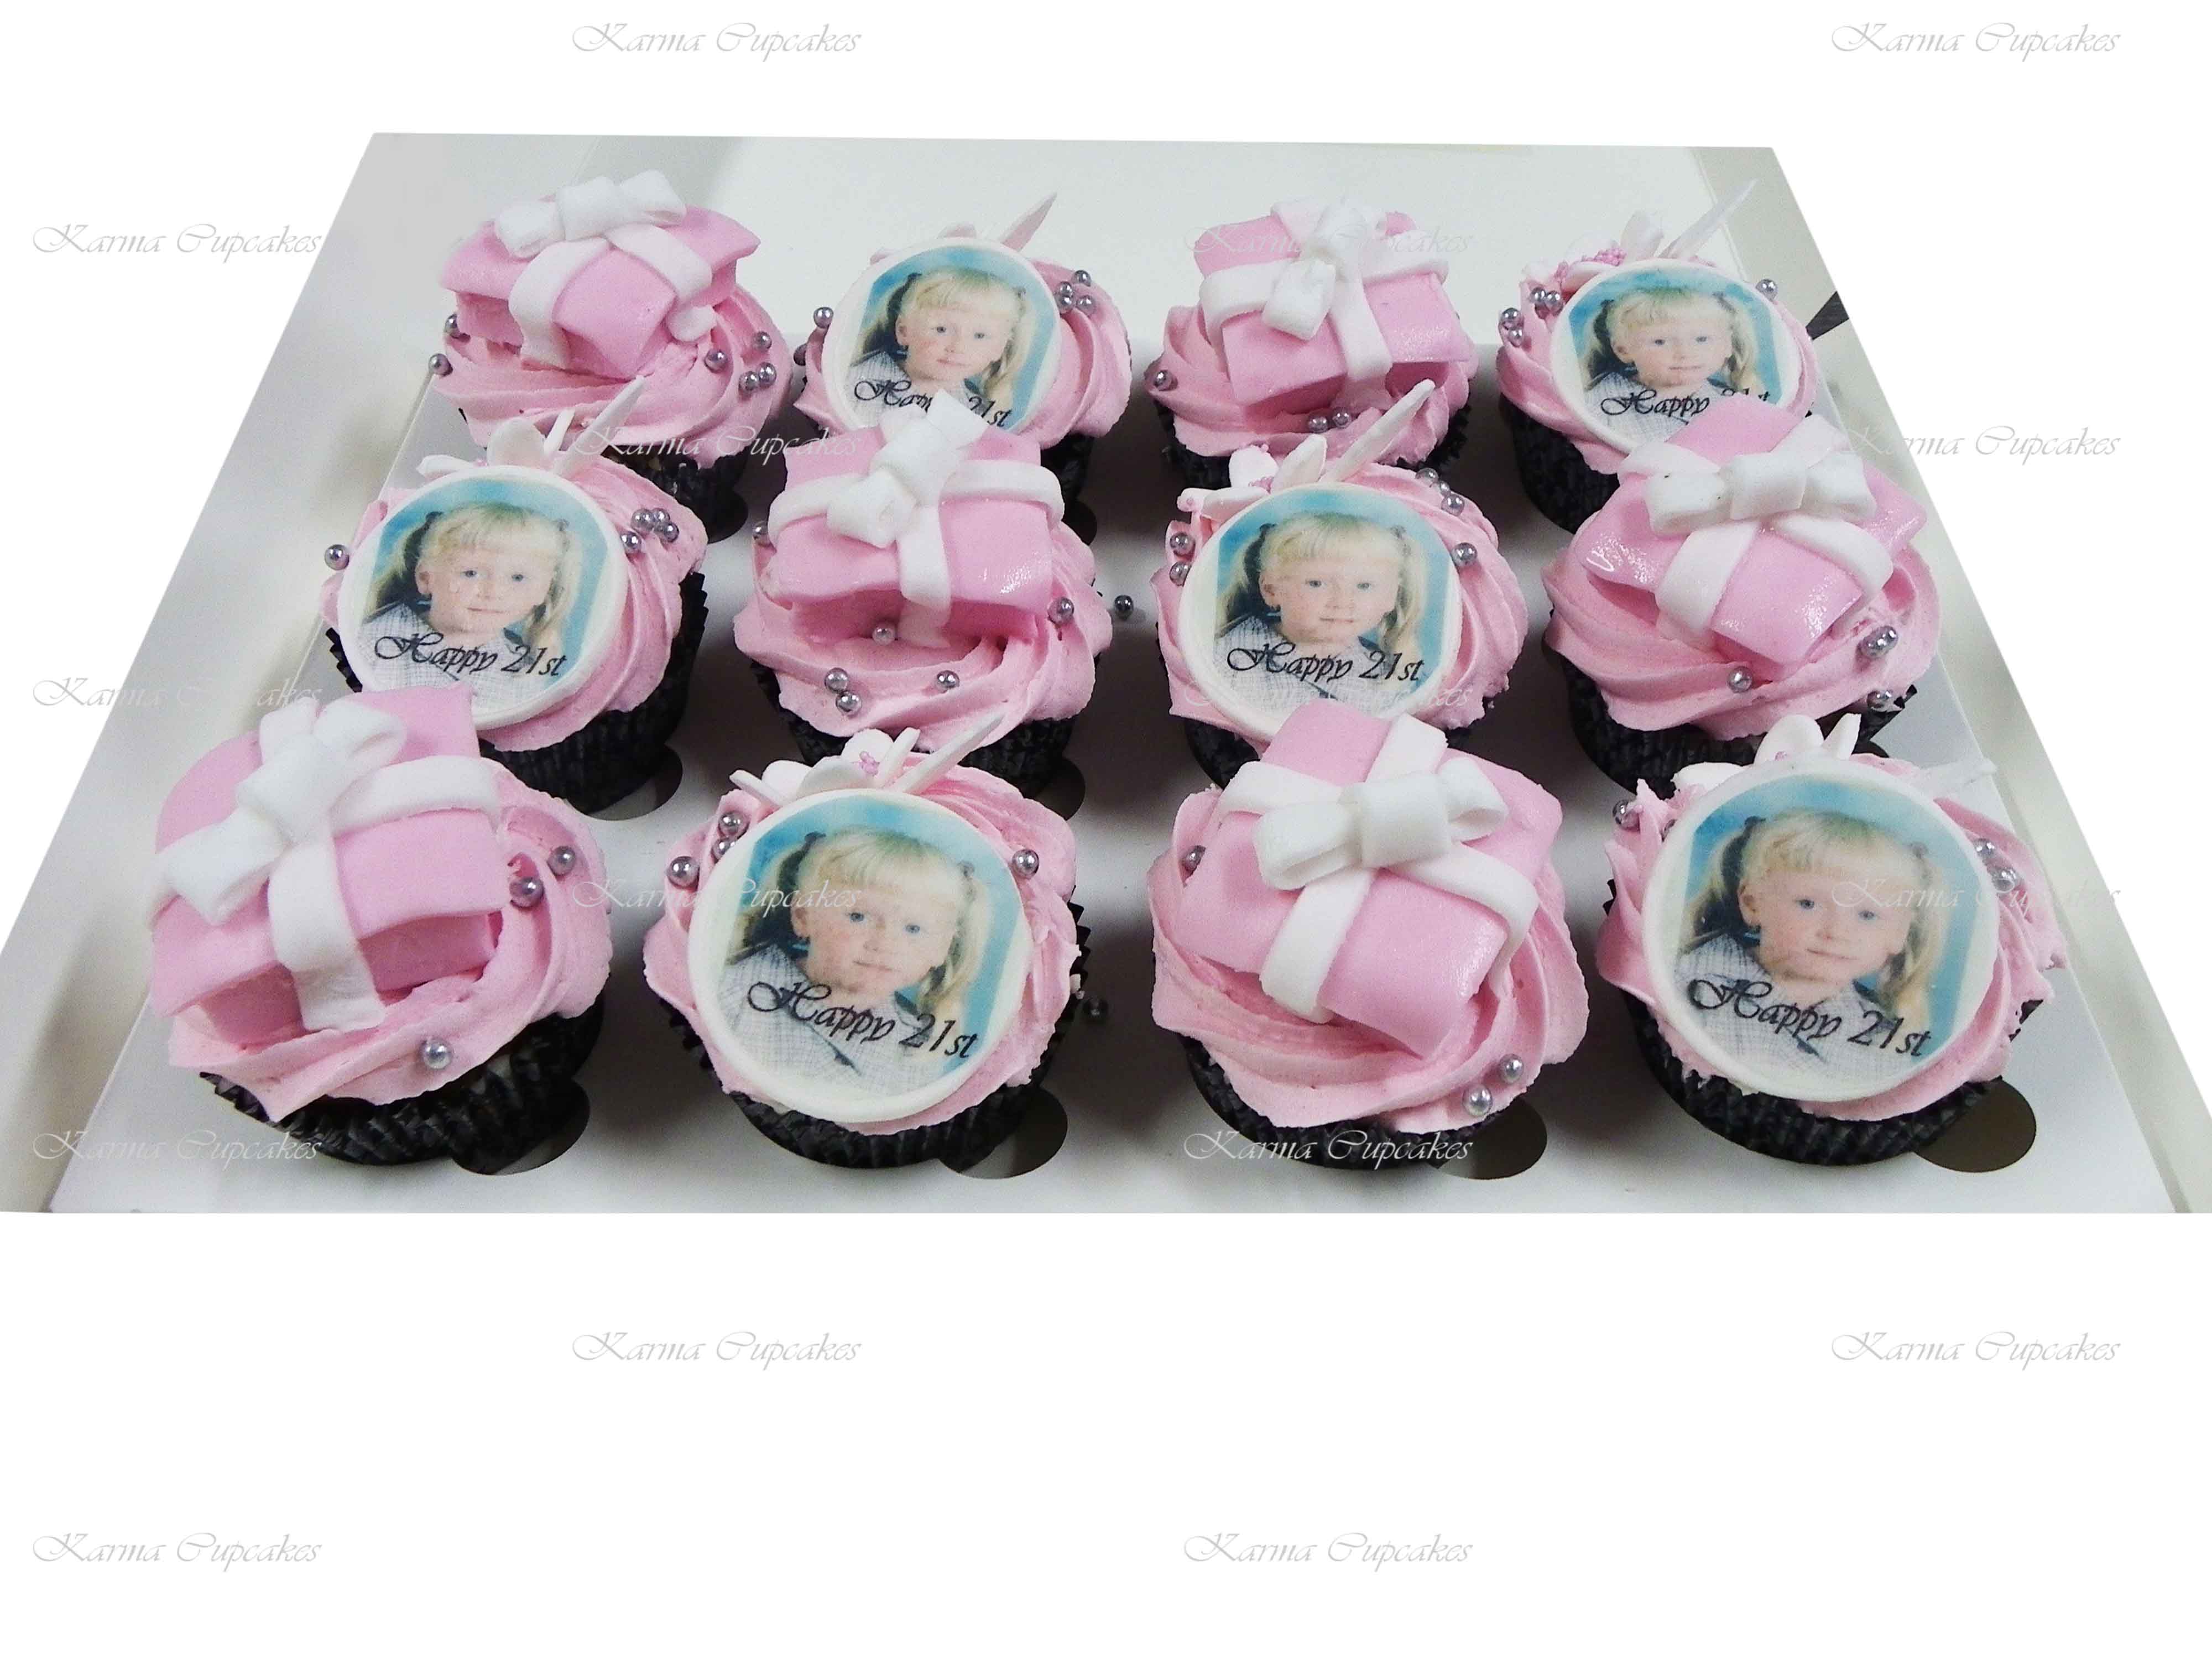 Birthday Cupcakes with Edible Photo and Handmade Presents